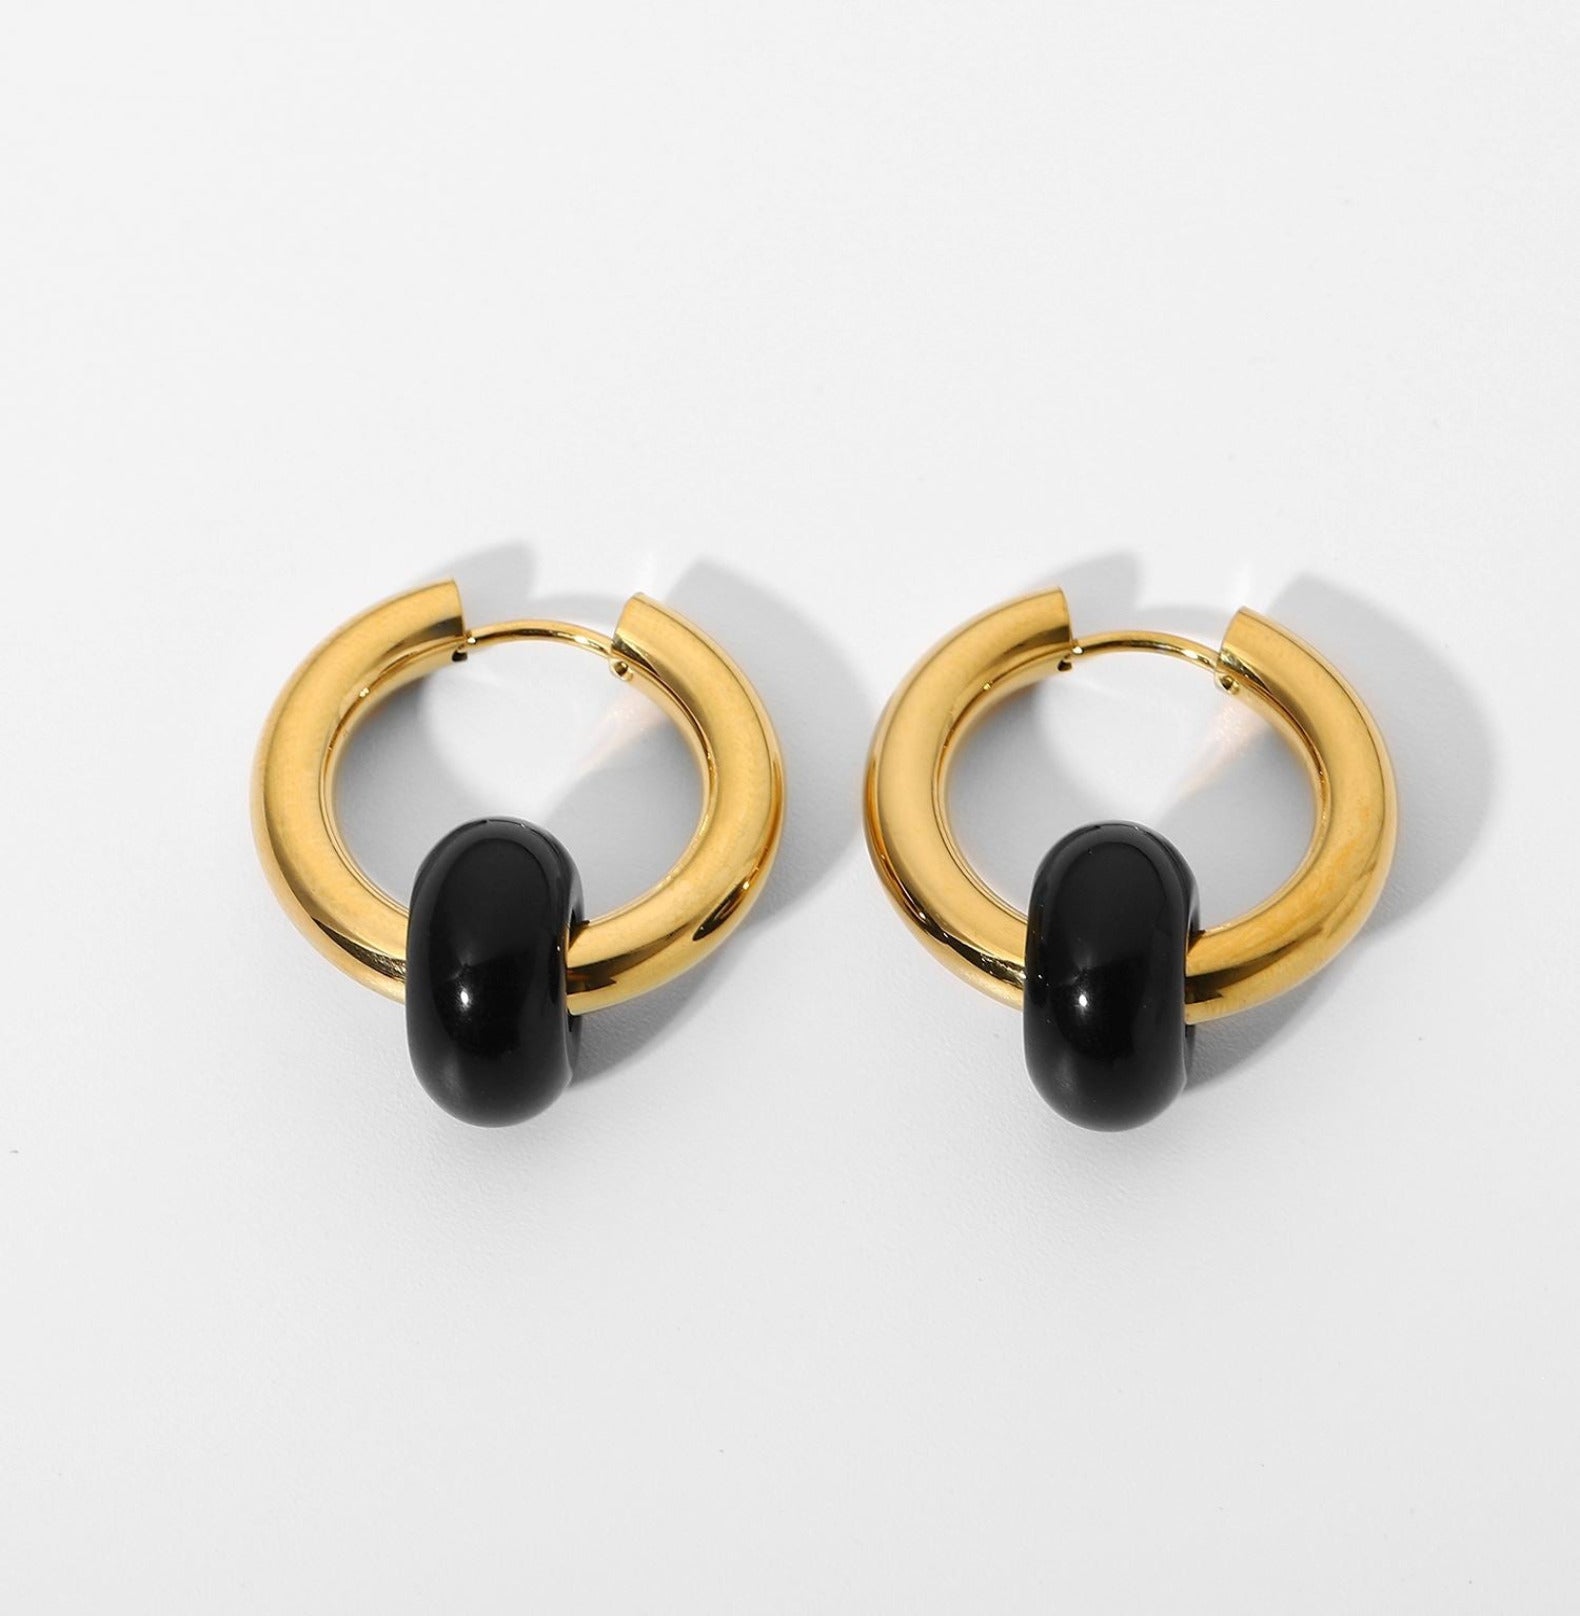 NATURAL STONE HOOPS EARRINGS earing Yubama Jewelry Online Store - The Elegant Designs of Gold and Silver ! black 